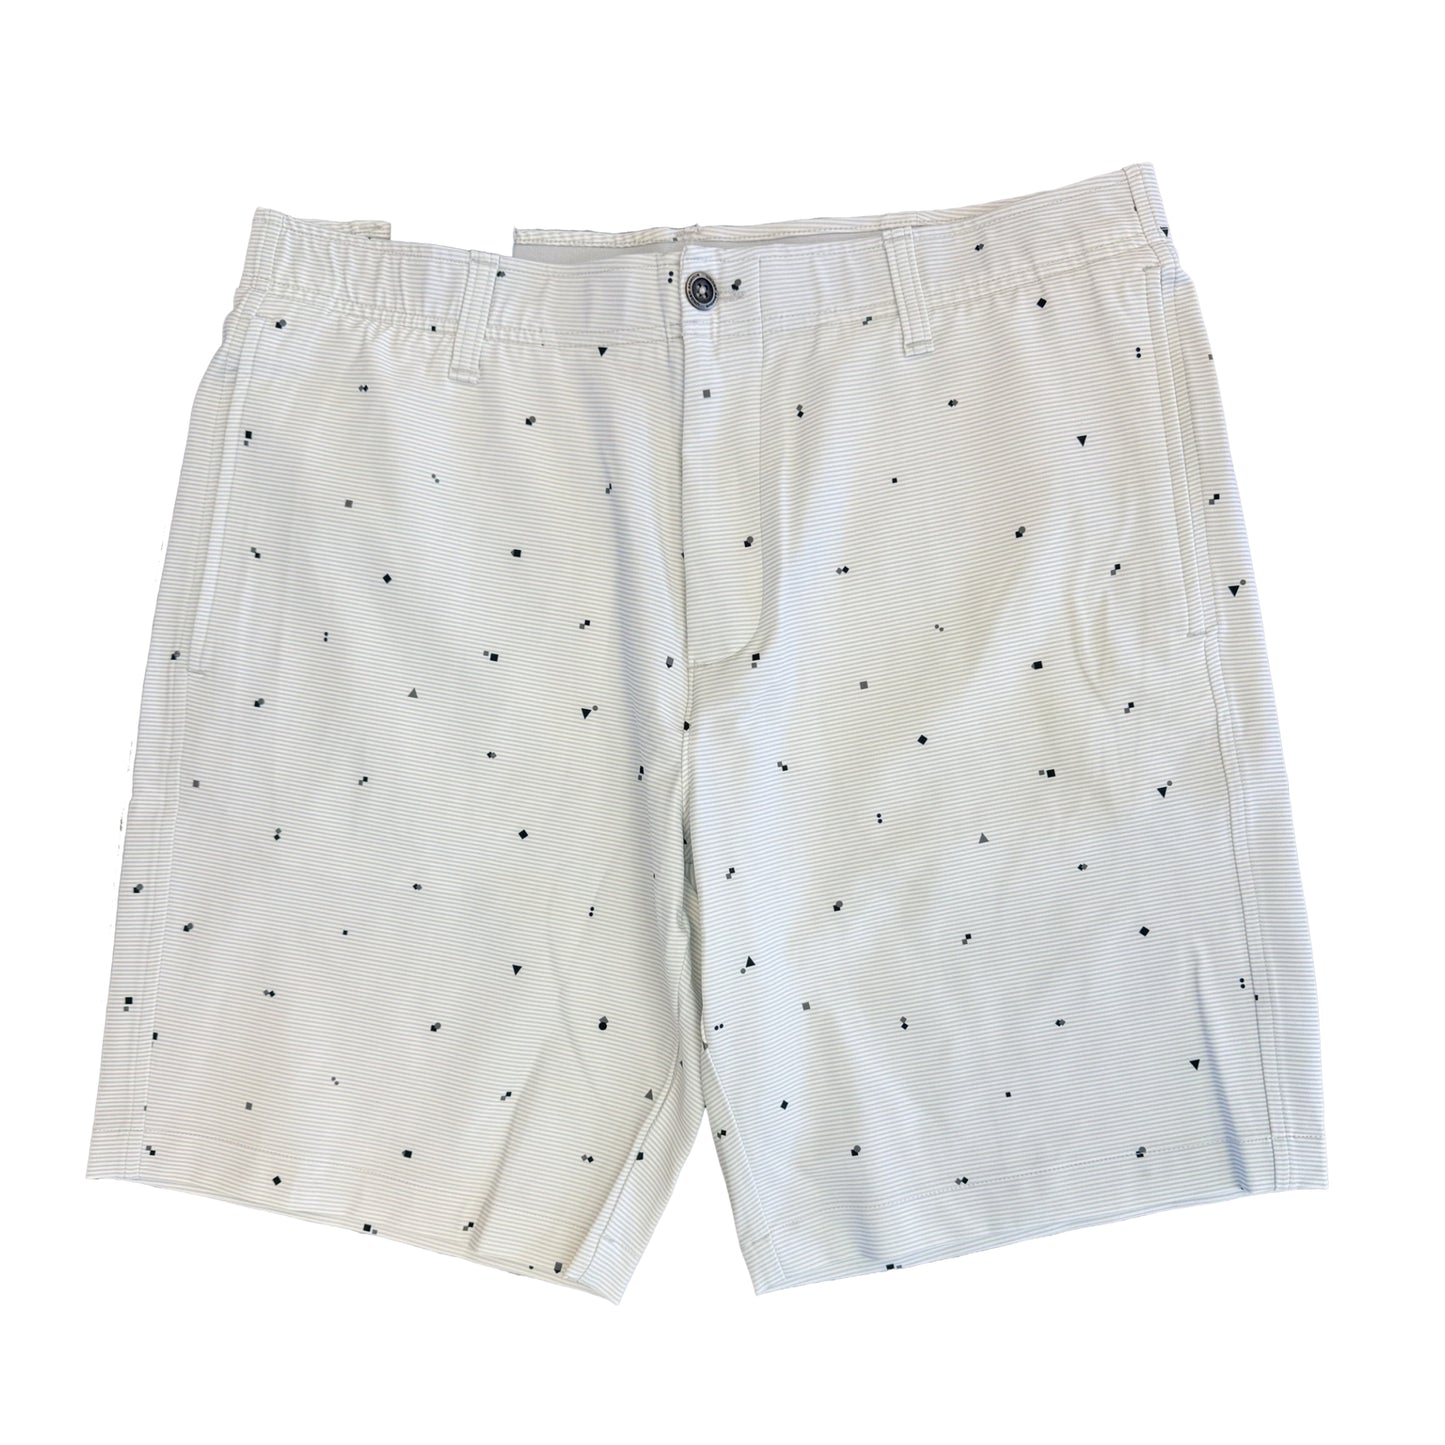 Under Armour Golf Printed Shorts White